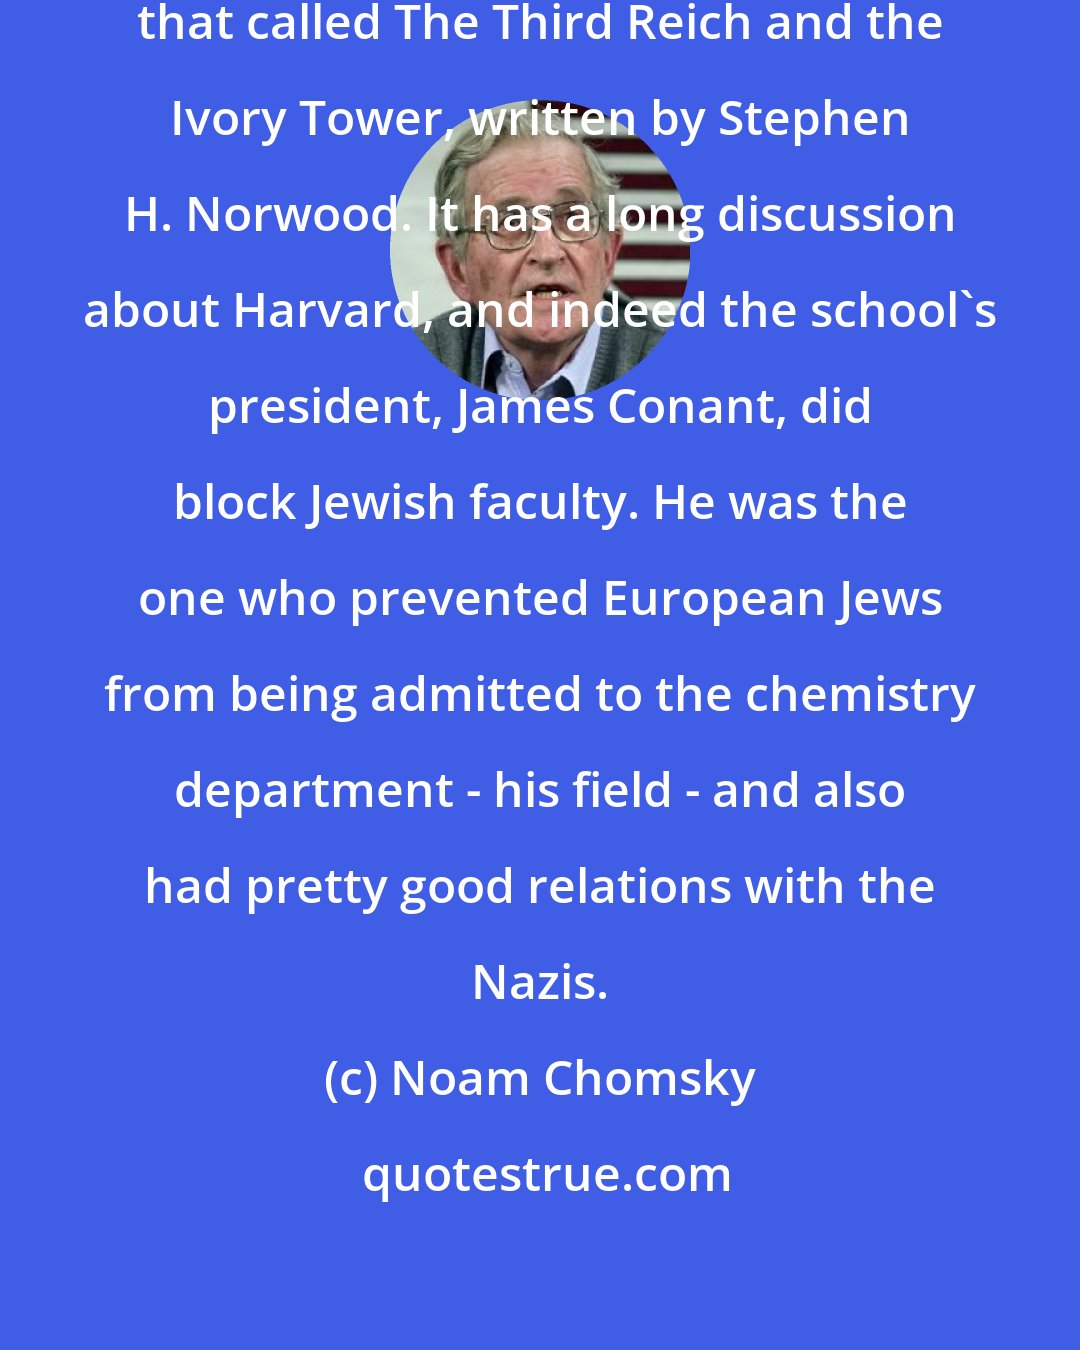 Noam Chomsky: There's an interesting book about that called The Third Reich and the Ivory Tower, written by Stephen H. Norwood. It has a long discussion about Harvard, and indeed the school's president, James Conant, did block Jewish faculty. He was the one who prevented European Jews from being admitted to the chemistry department - his field - and also had pretty good relations with the Nazis.